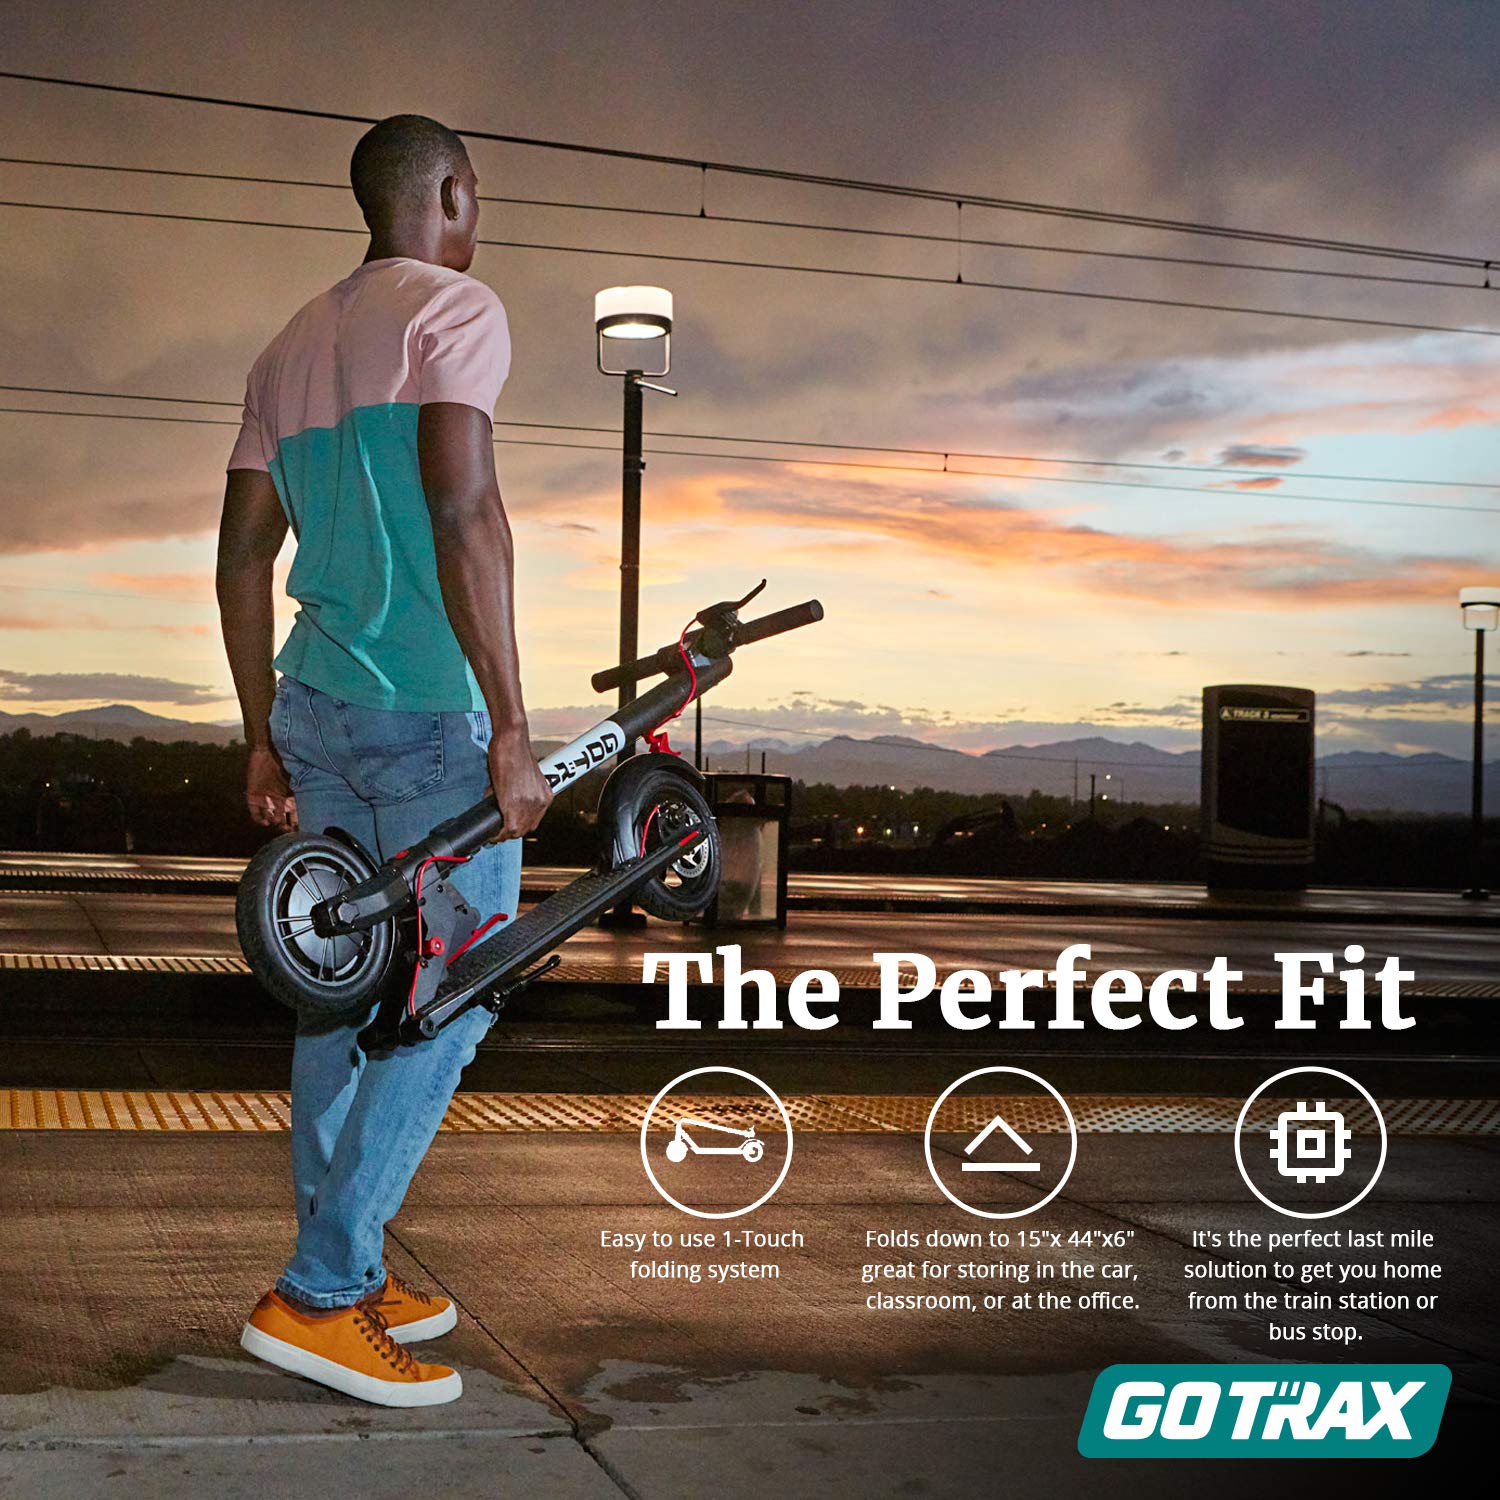 Gotrax GXL V2 Commuting Electric Scooter - 8.5" Air Filled Tires - 15.5MPH & 9-12 Mile Range - Version 2